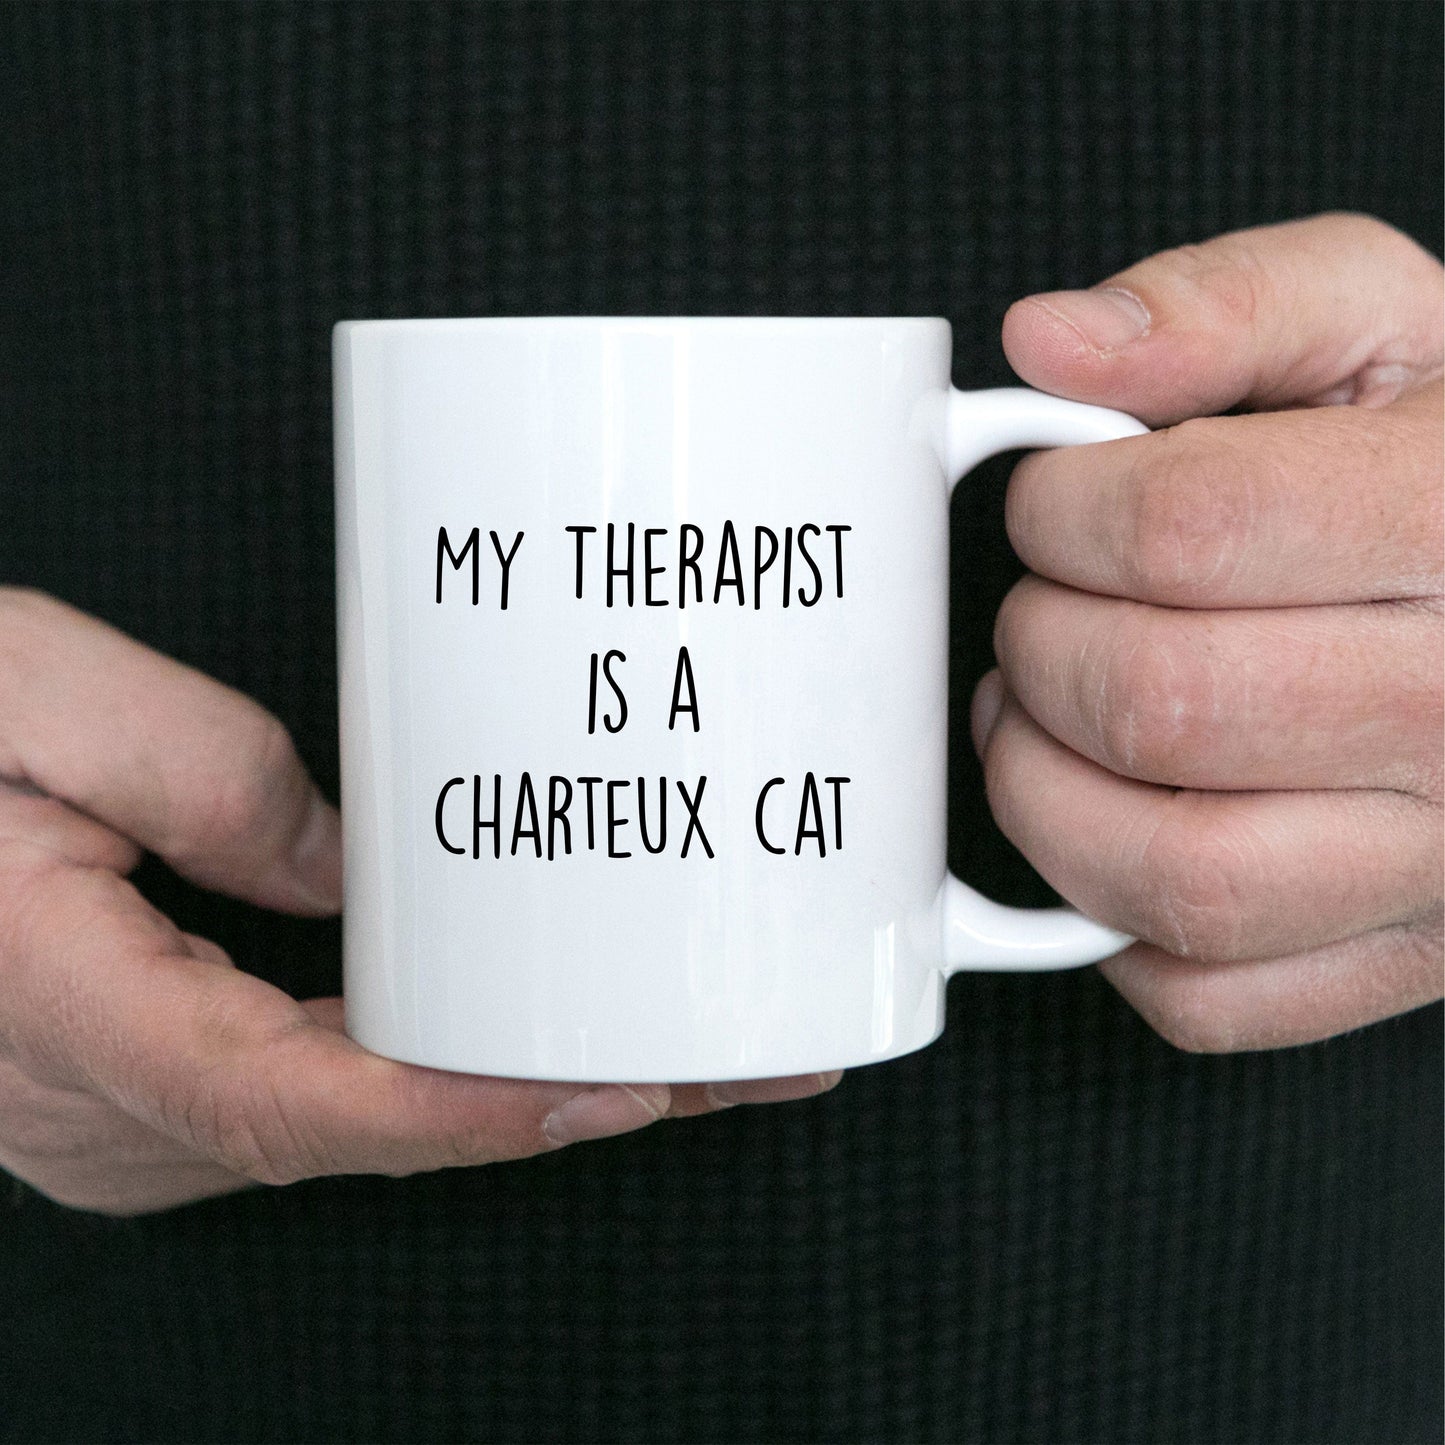 Chartreux Cat Therapist Funny Personalized Ceramic Coffee Mug